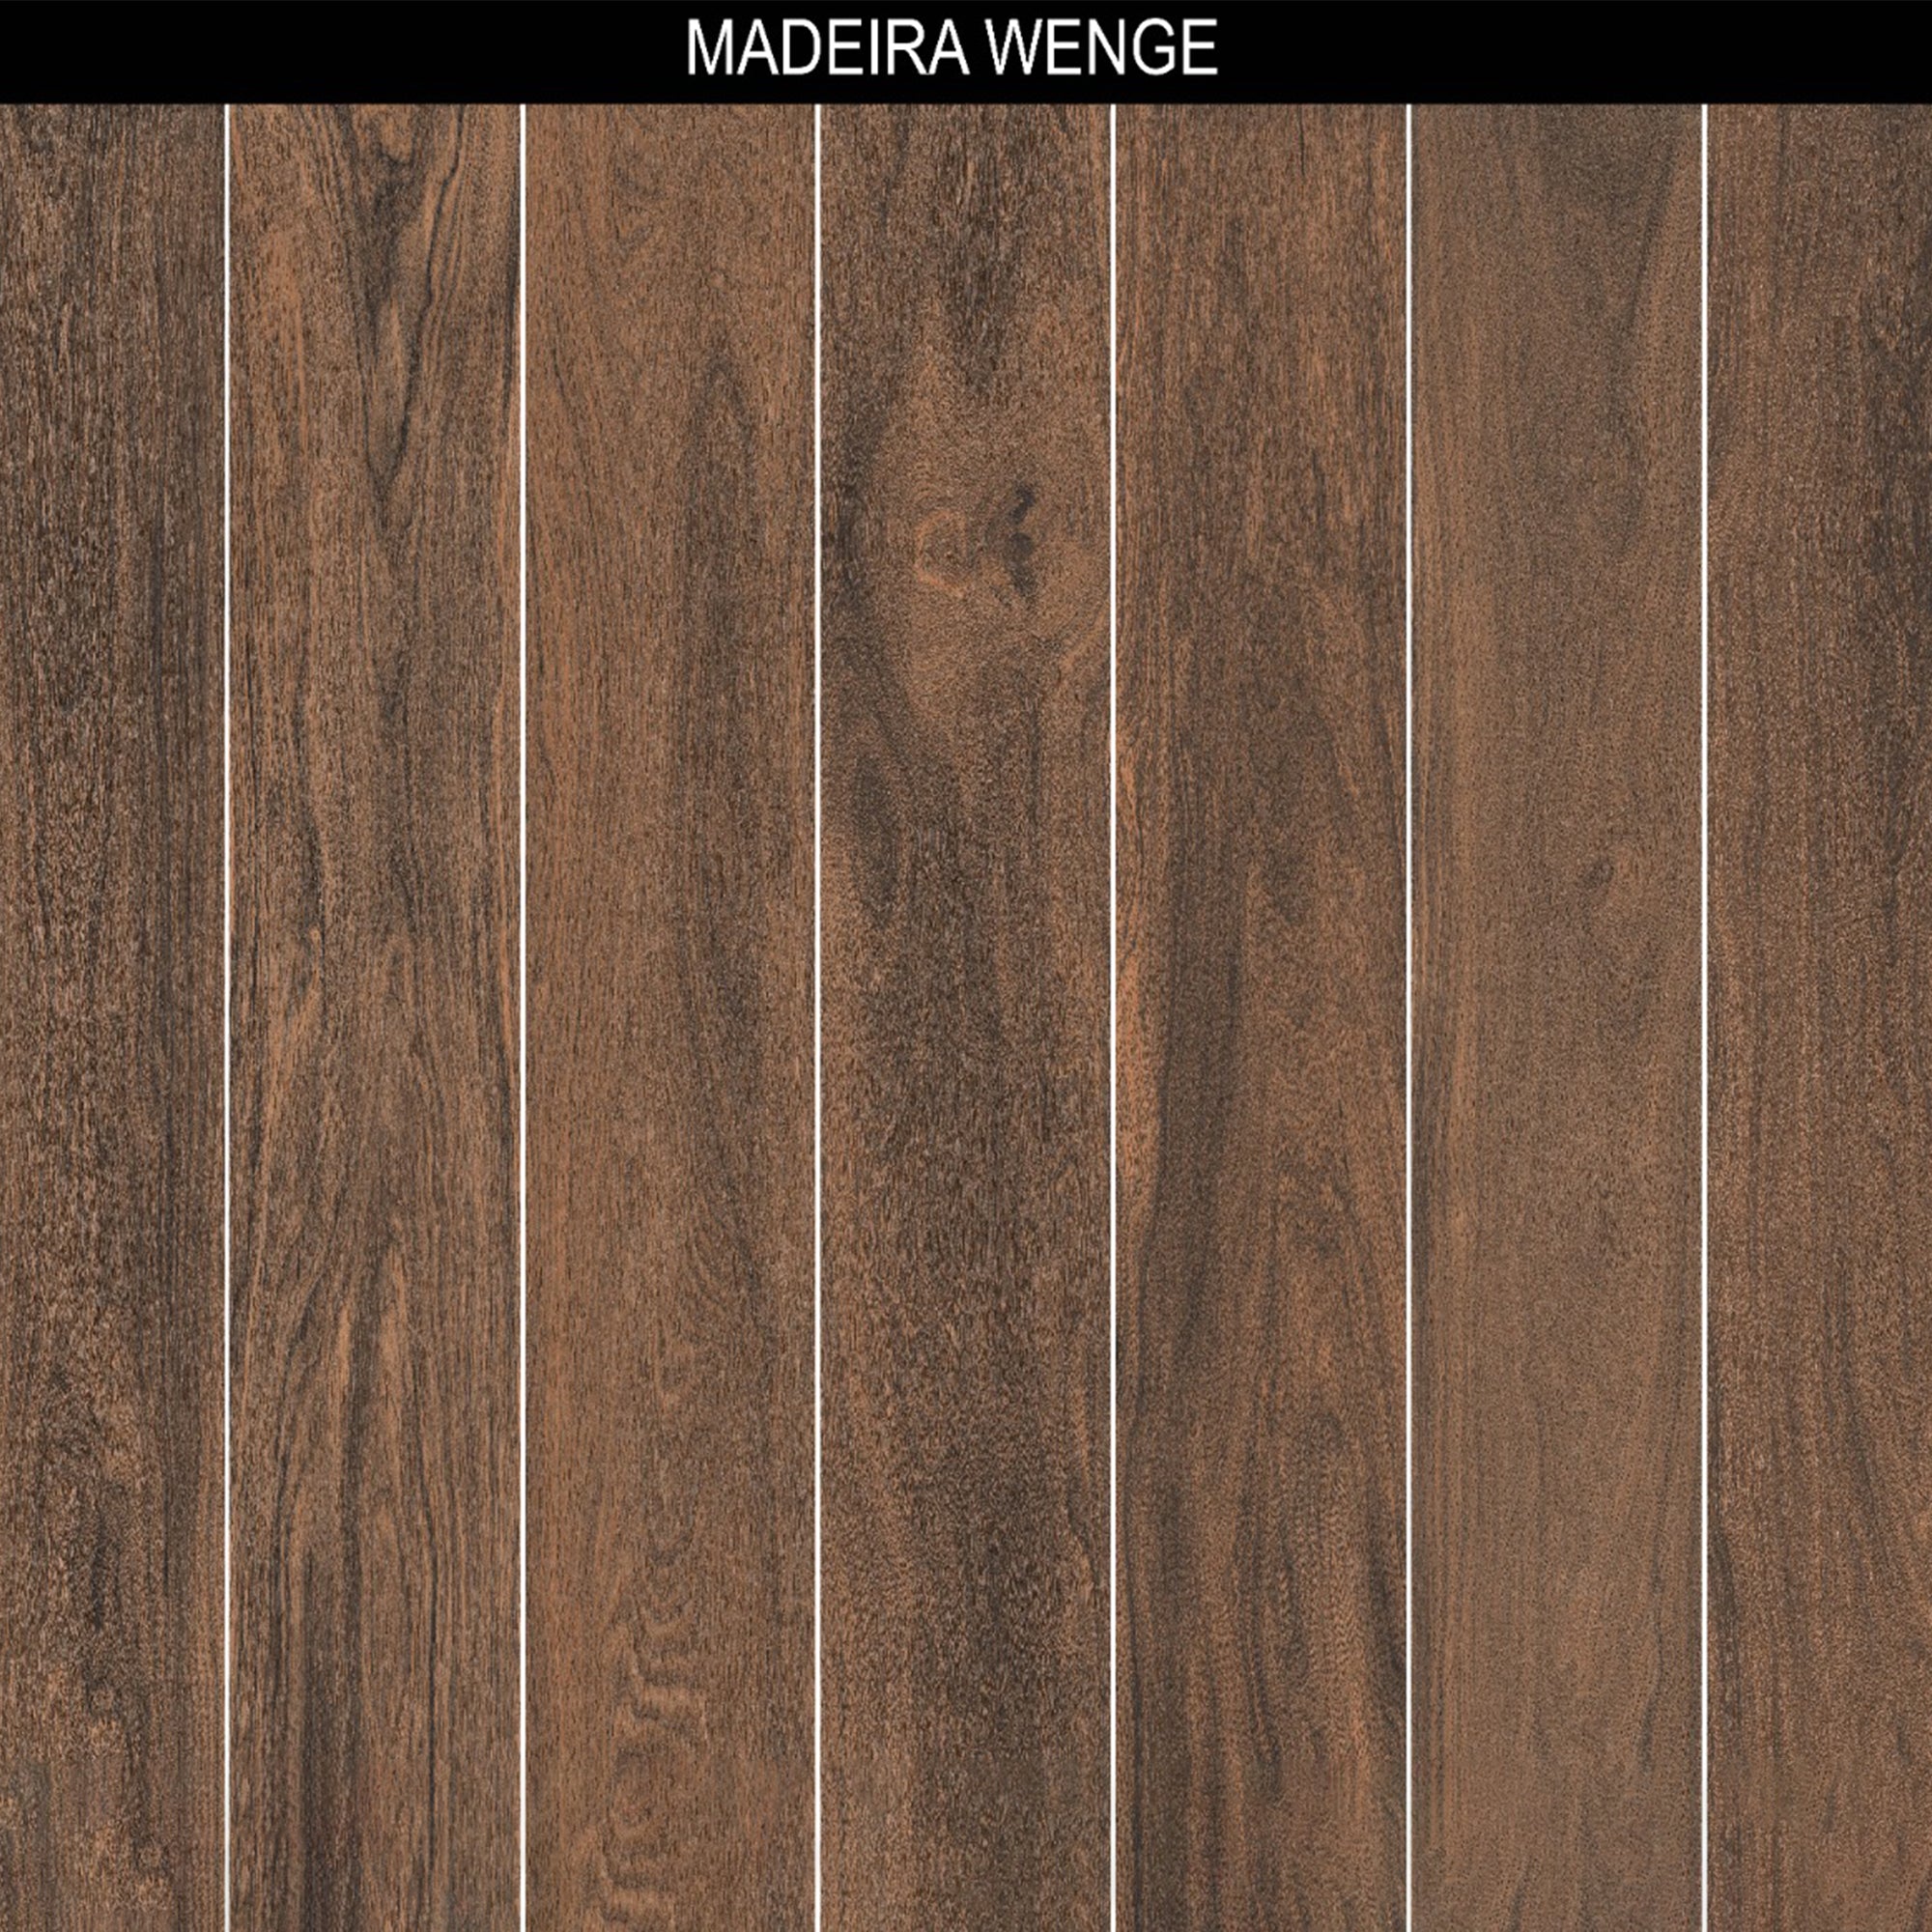 MADEIRA WENGE 8 in. x 48 in. x 8.5 mm MATT Marble Look Tile - Porcelain Floor and Wall Tile (15.07 Sqft/Box)